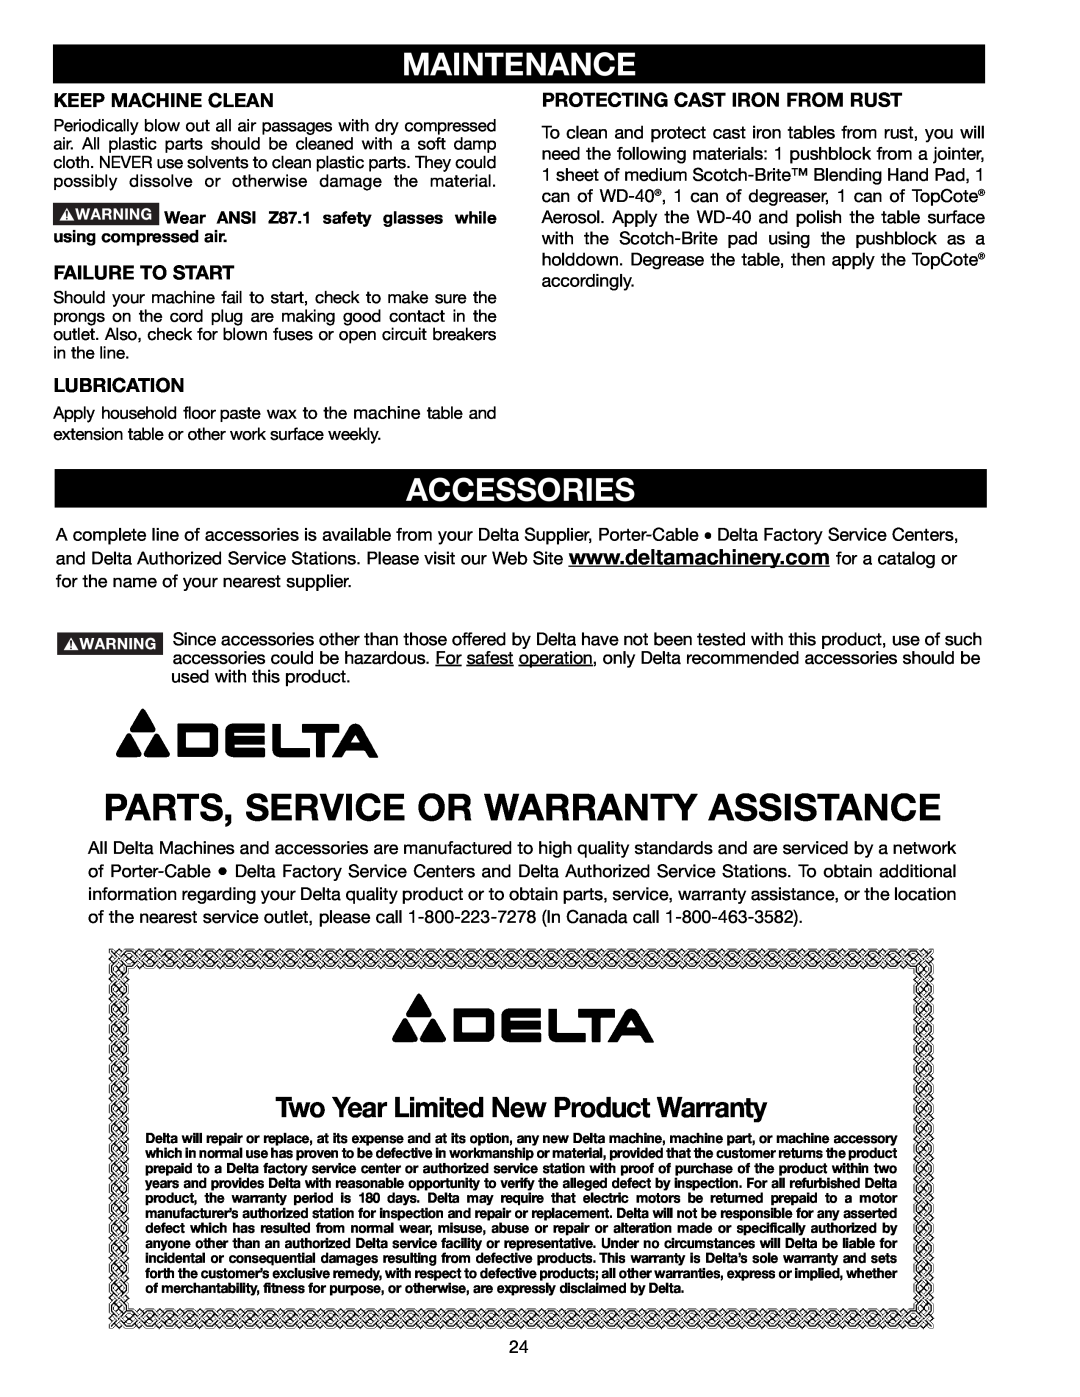 Delta BS150LS Maintenance, Accessories, Two Year Limited New Product Warranty, Parts, Service Or Warranty Assistance 